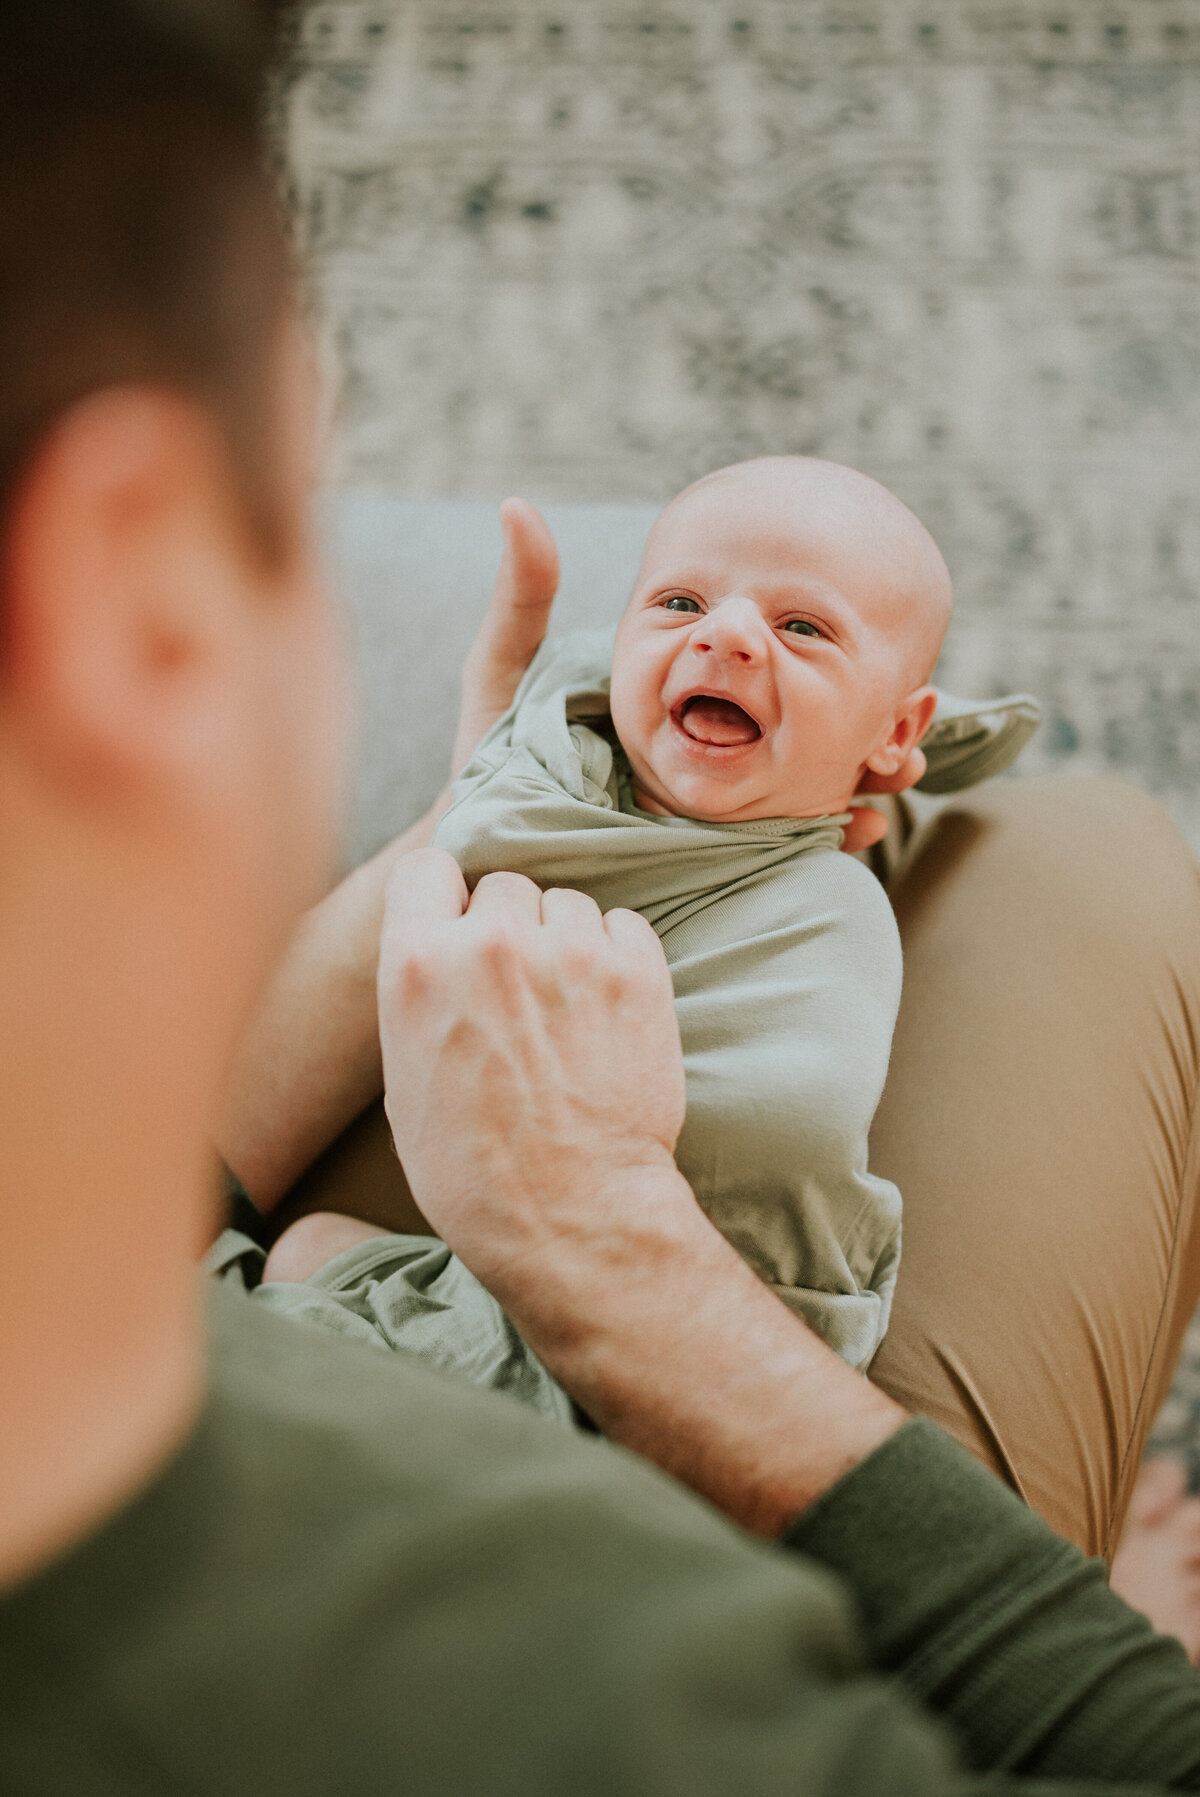 In the heart of Champlin, this heartwarming image captures a precious newborn baby boy as he shares a beautiful moment with his dad. Lay back on his lap and adorned with a joyful smile, this little one undergoes a clothing change, creating a memory of the loving bond between father and son.